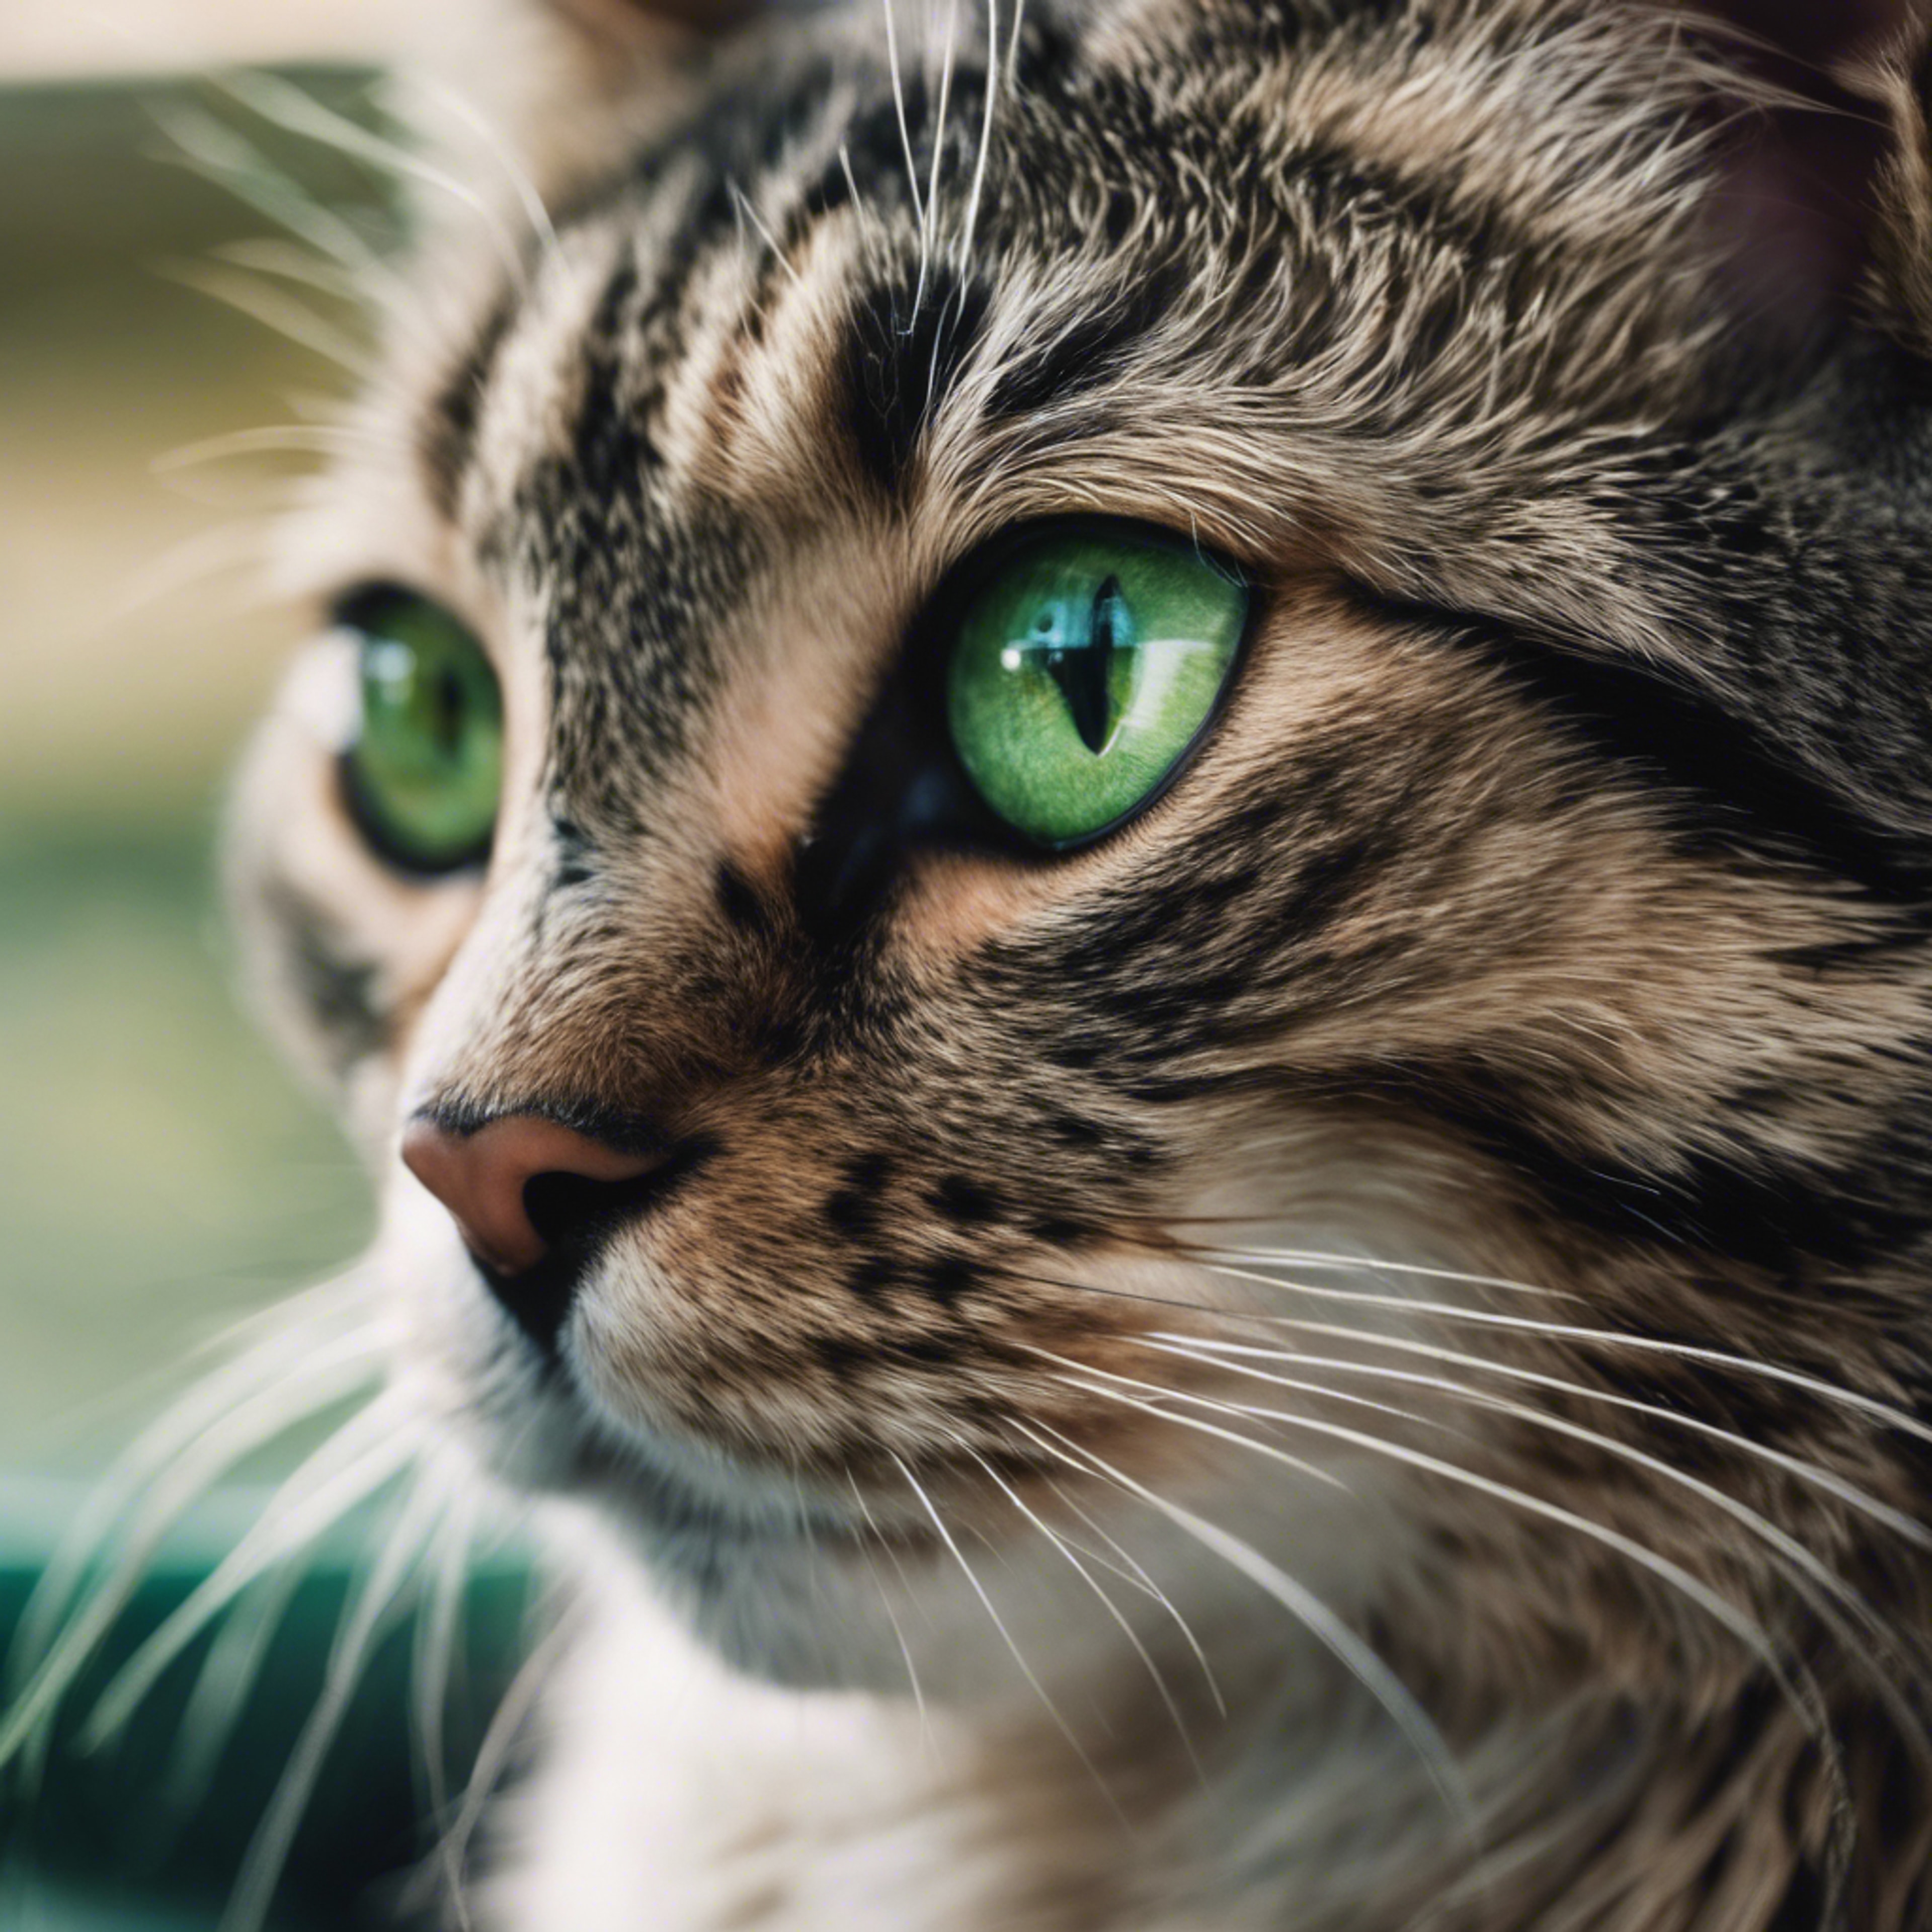 A cat with unusual dark green eyes looking intently at something.壁紙[b079ccec3fc6439bb0c0]